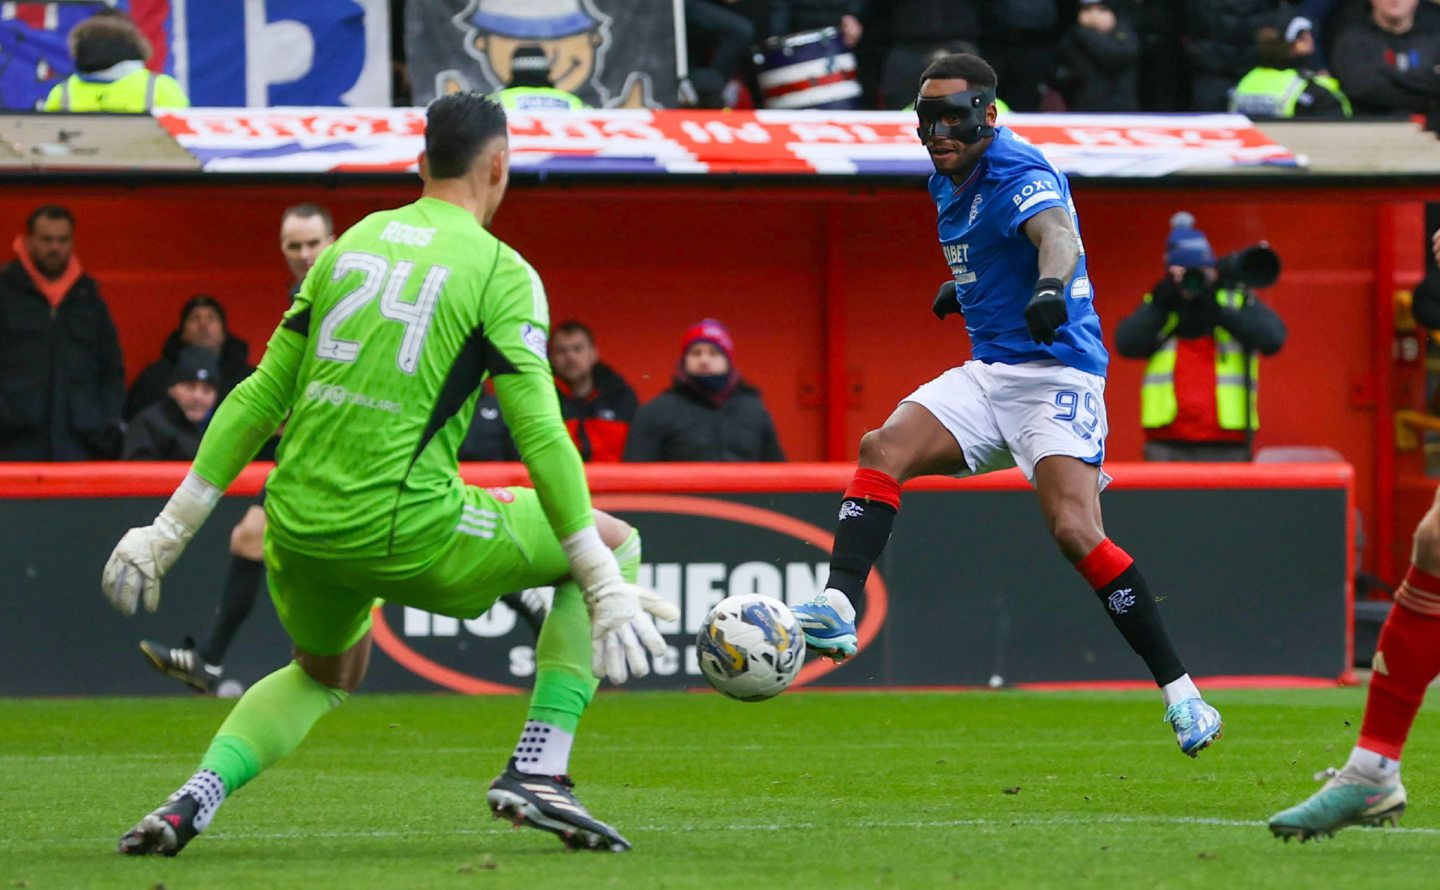 Aberdeen's Kelle Roos makes a save from Rangers' Danilo at Pittodrie. Image: SNS